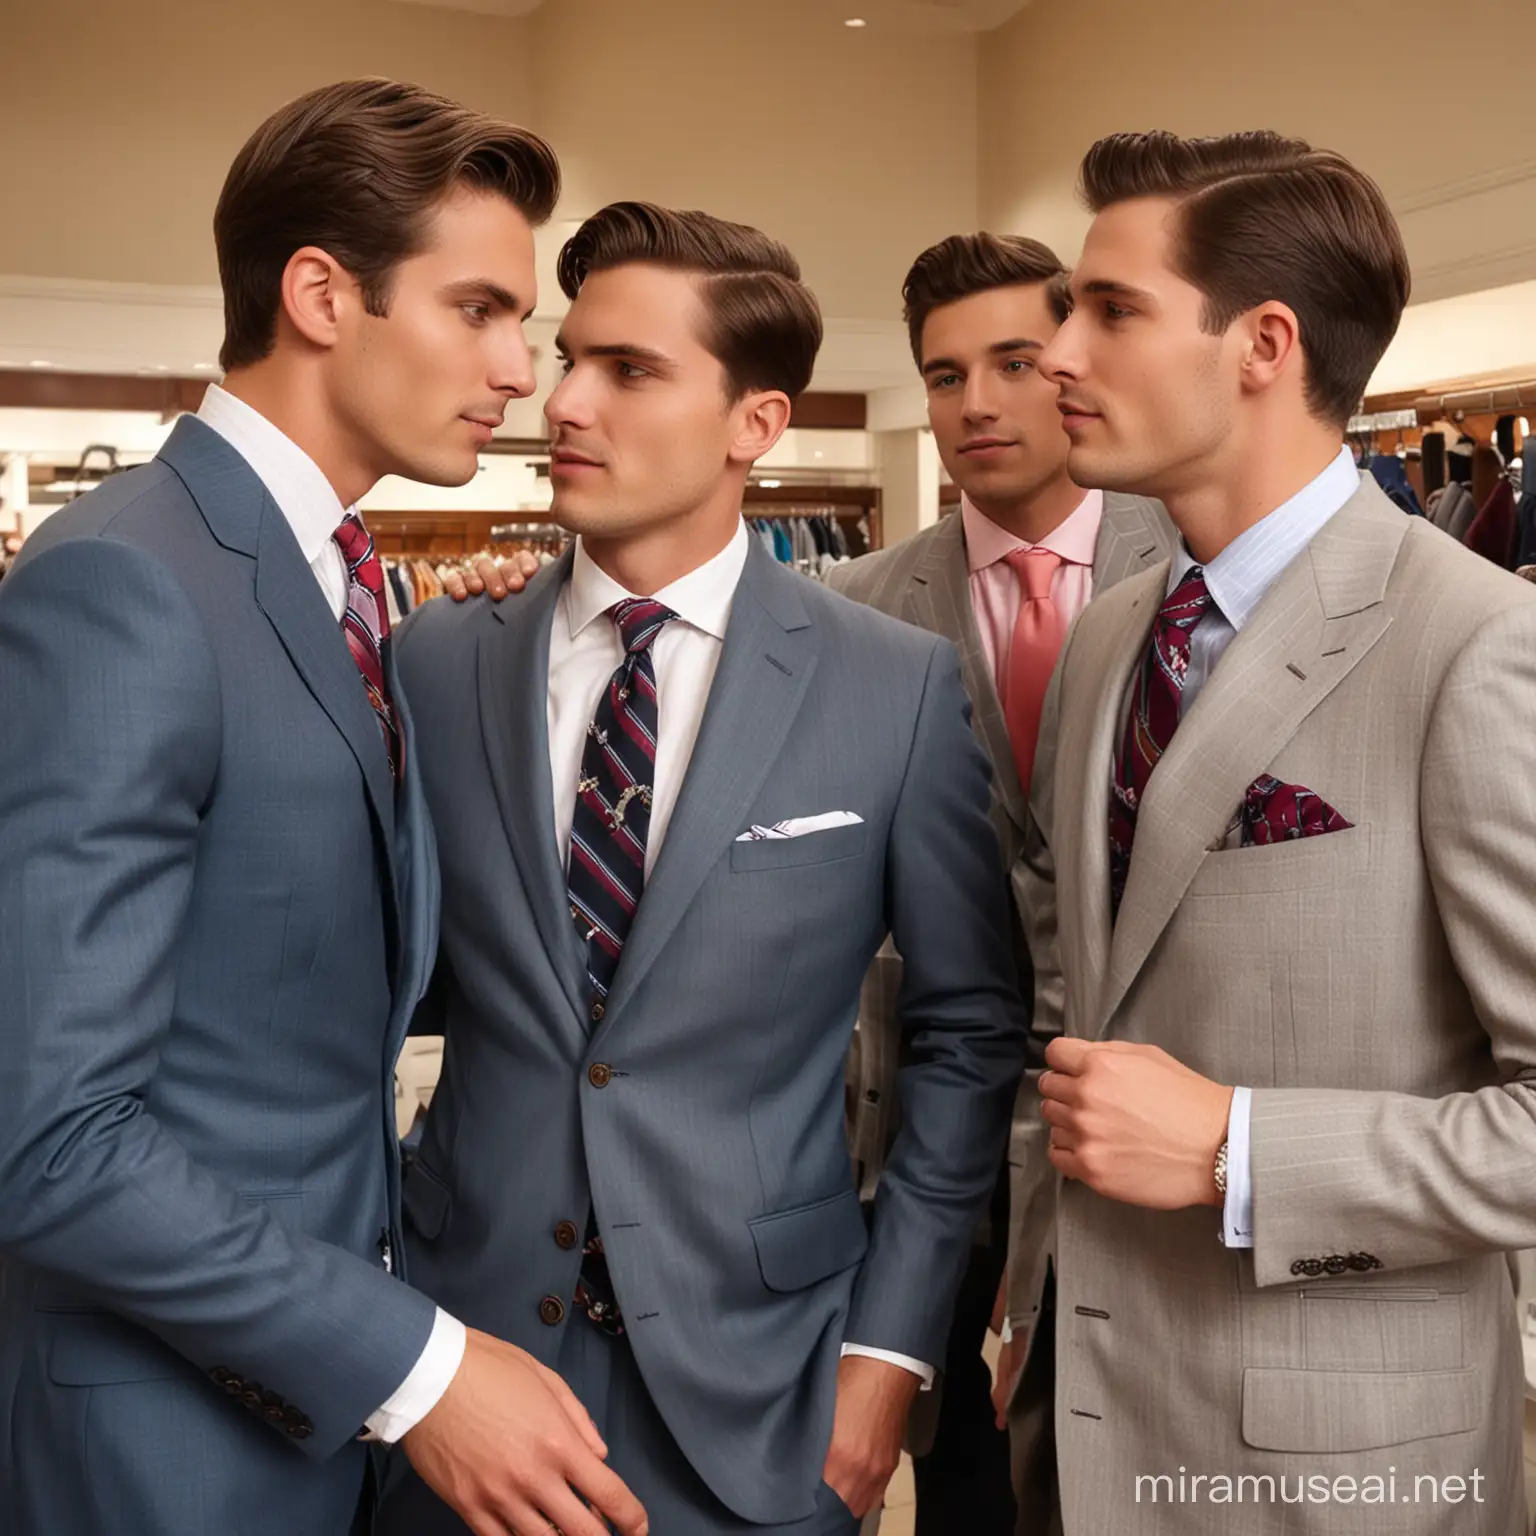 Men Trying New Suits and Ties at Brooks Brothers Flirting and Kissing in Technicolor